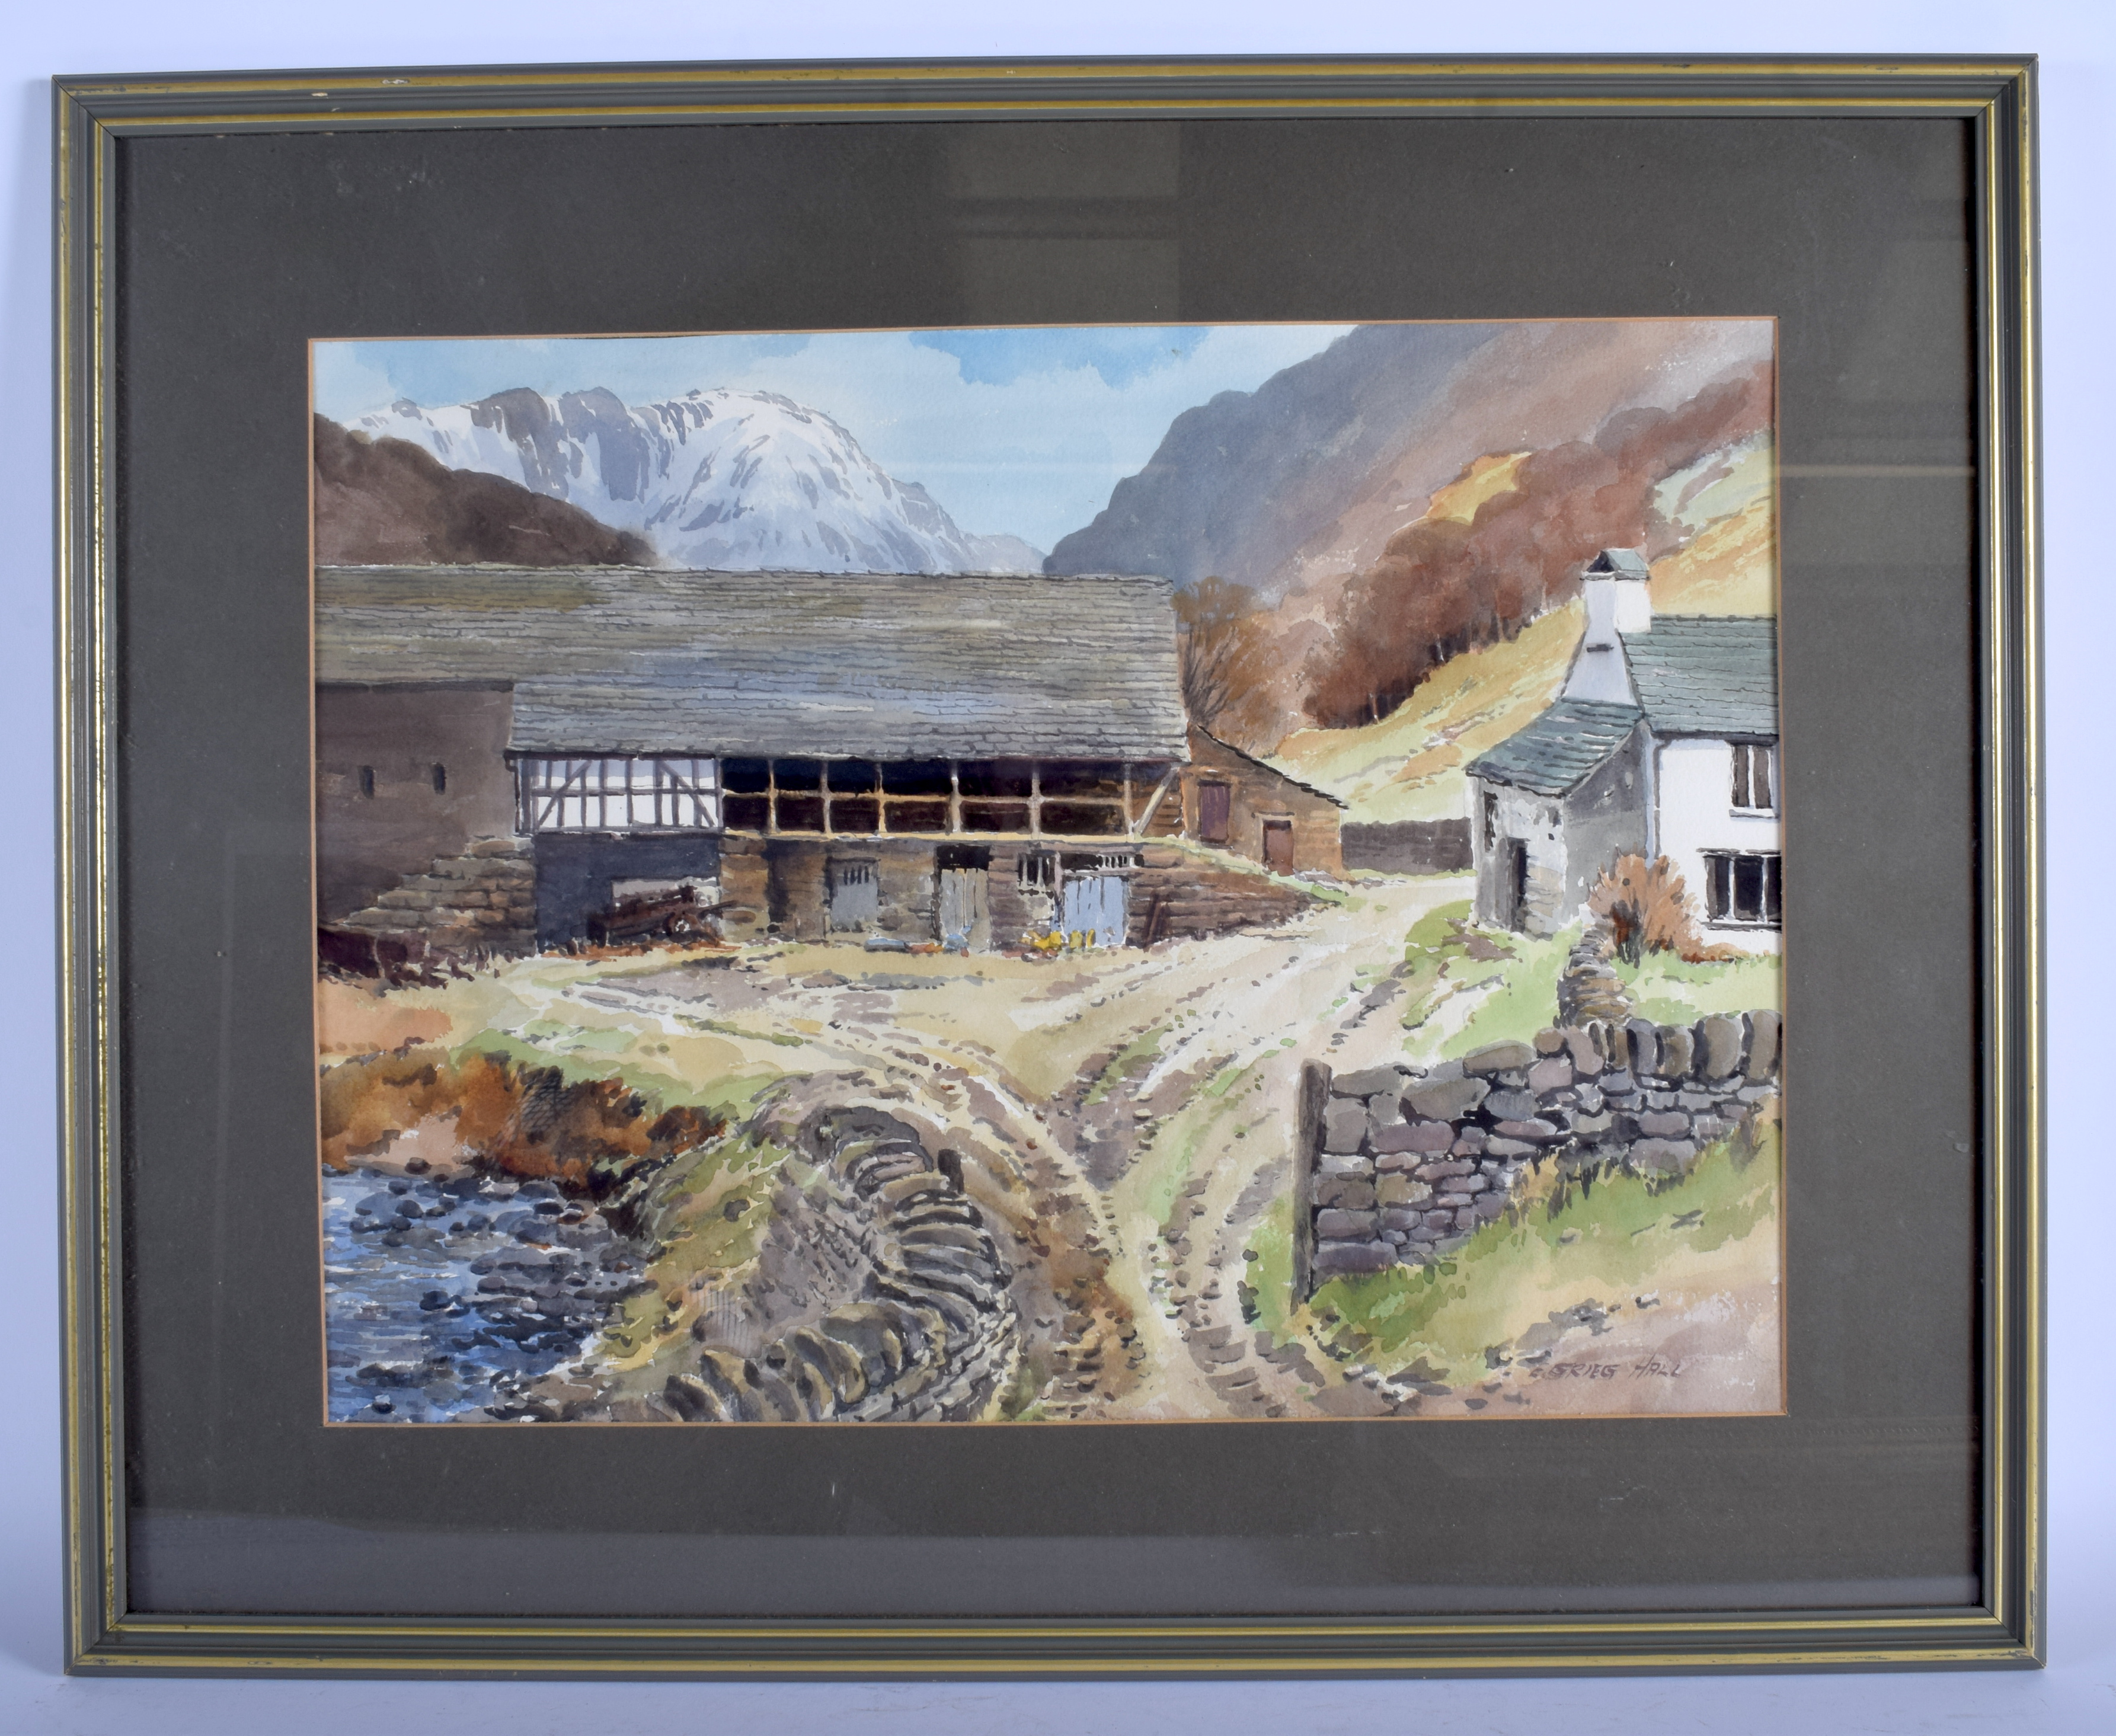 E Grieg Hall (C1950) Lake District, Pair of Watercolours. Image 50 cm x 35 cm. - Image 5 of 8